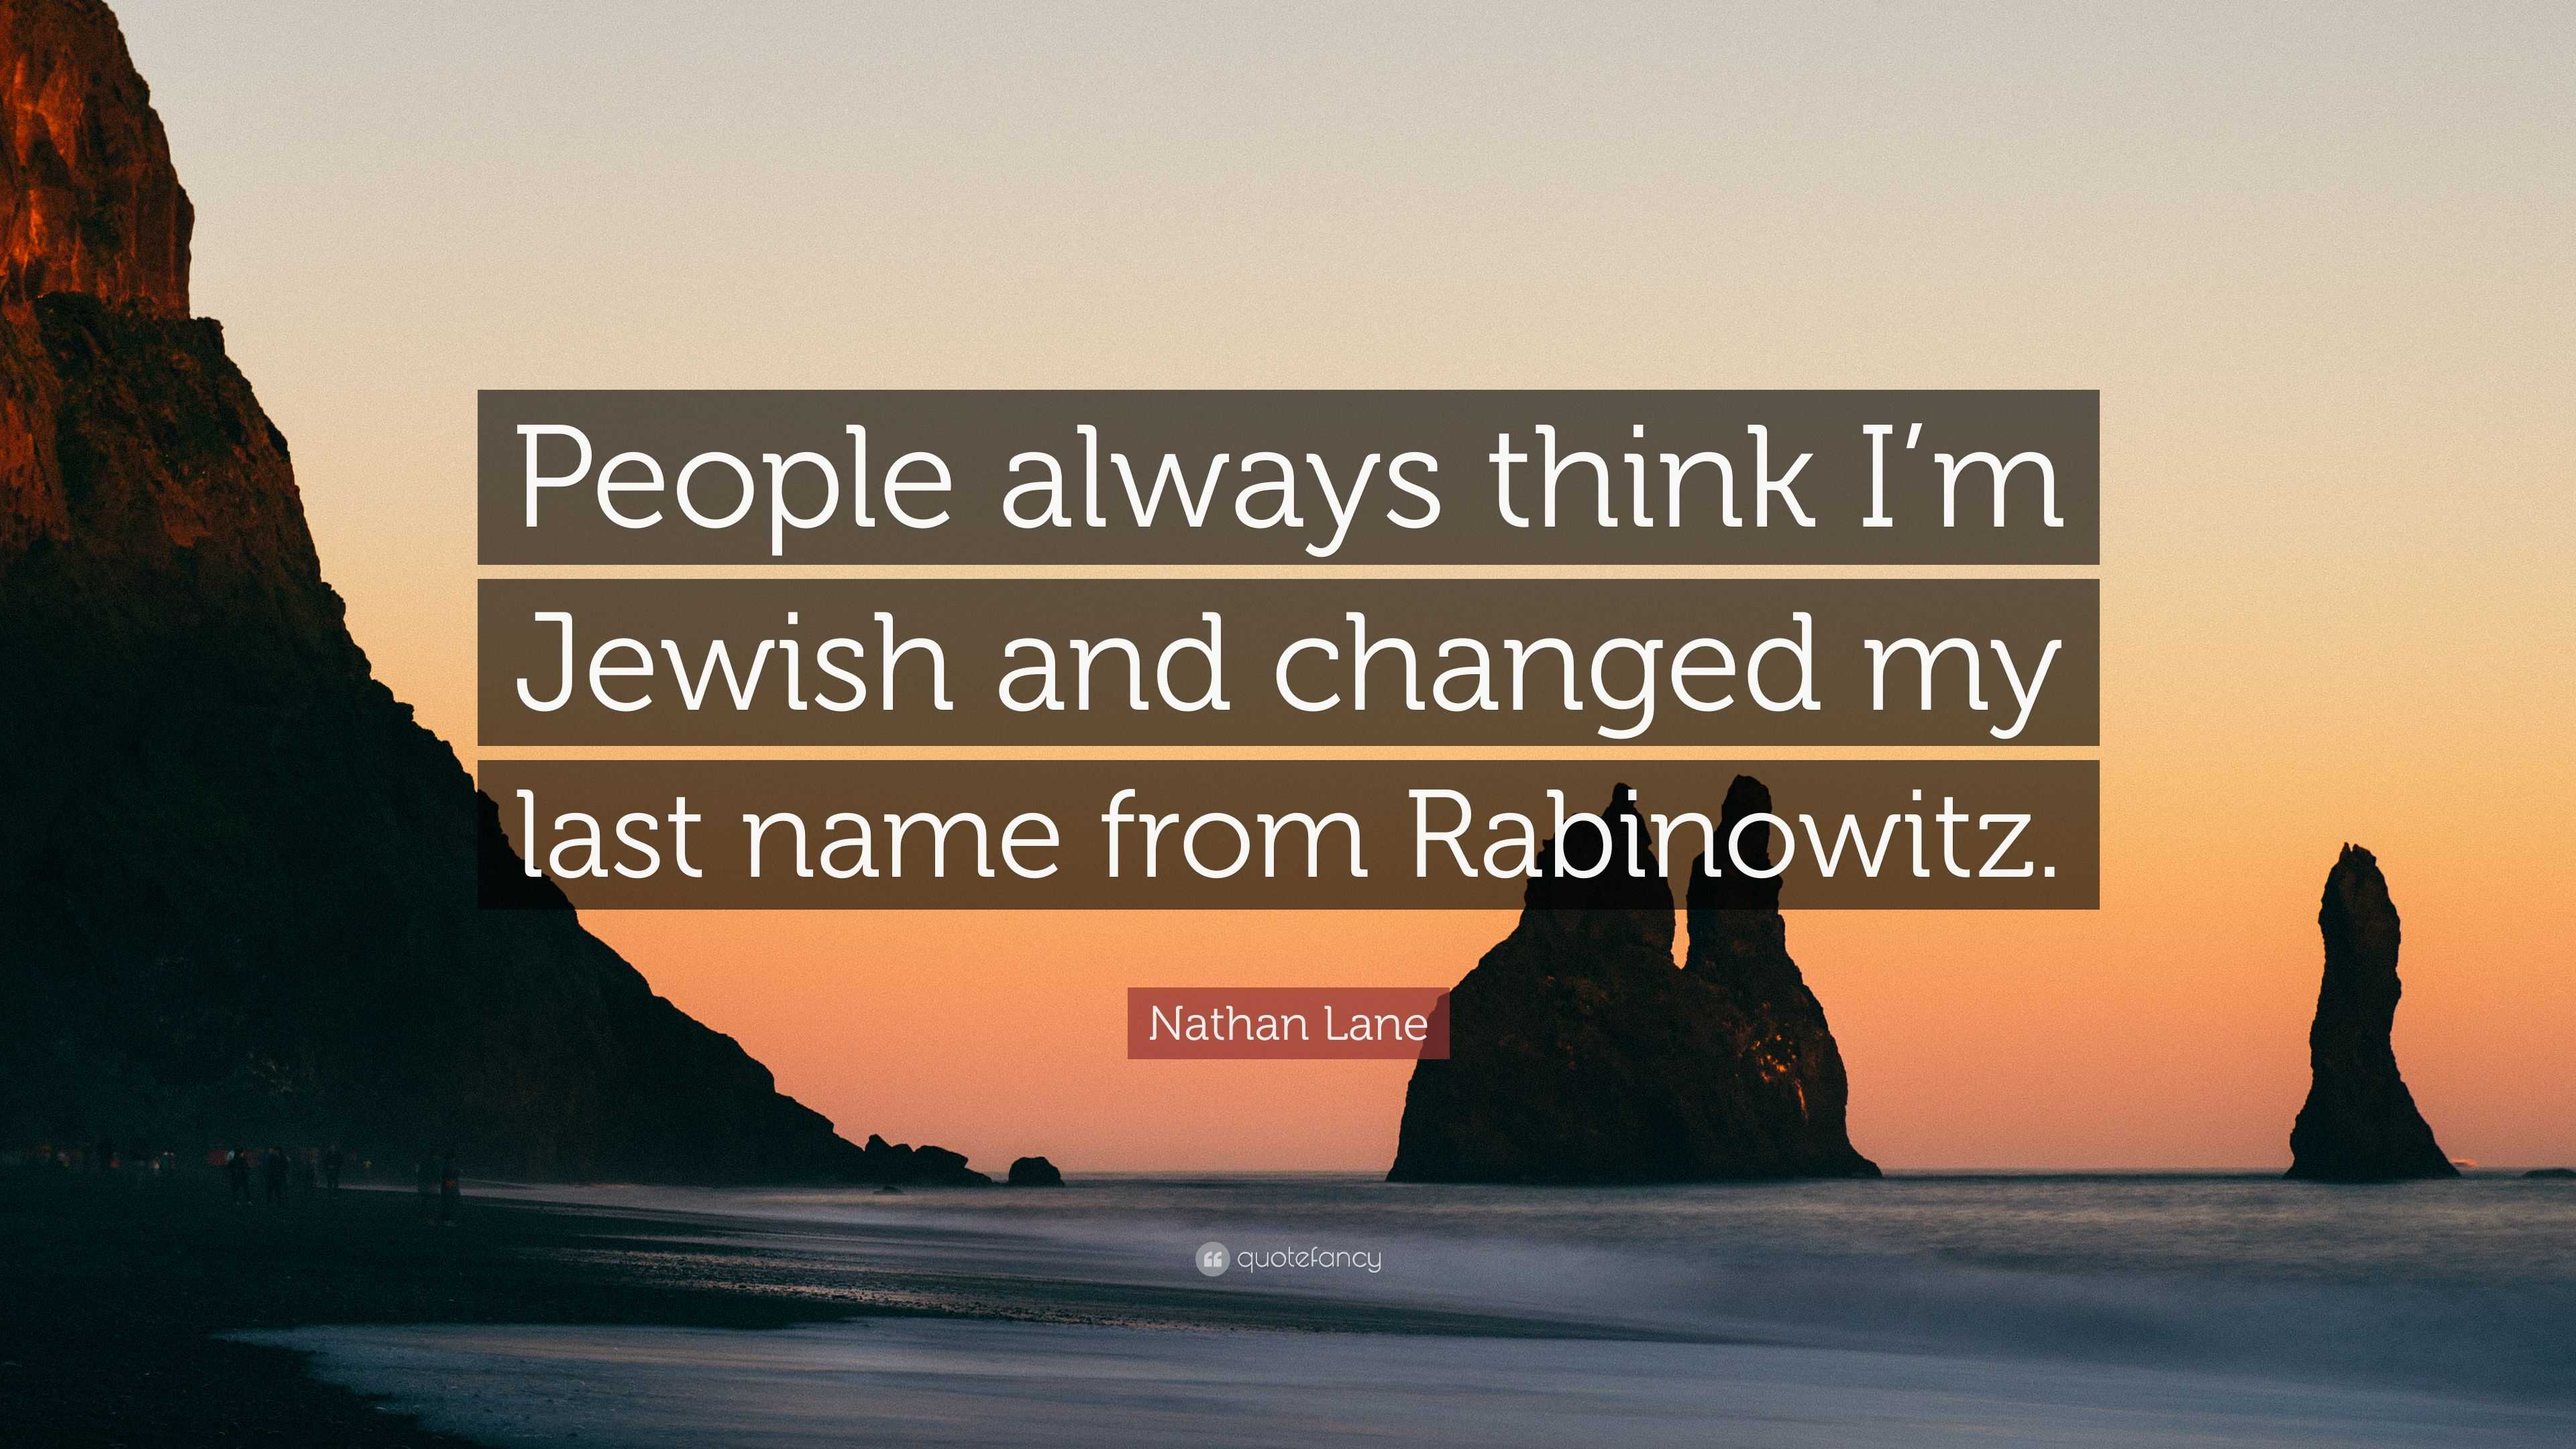 Nathan Lane Quote: “People always think I'm Jewish and changed my last name  from Rabinowitz.”